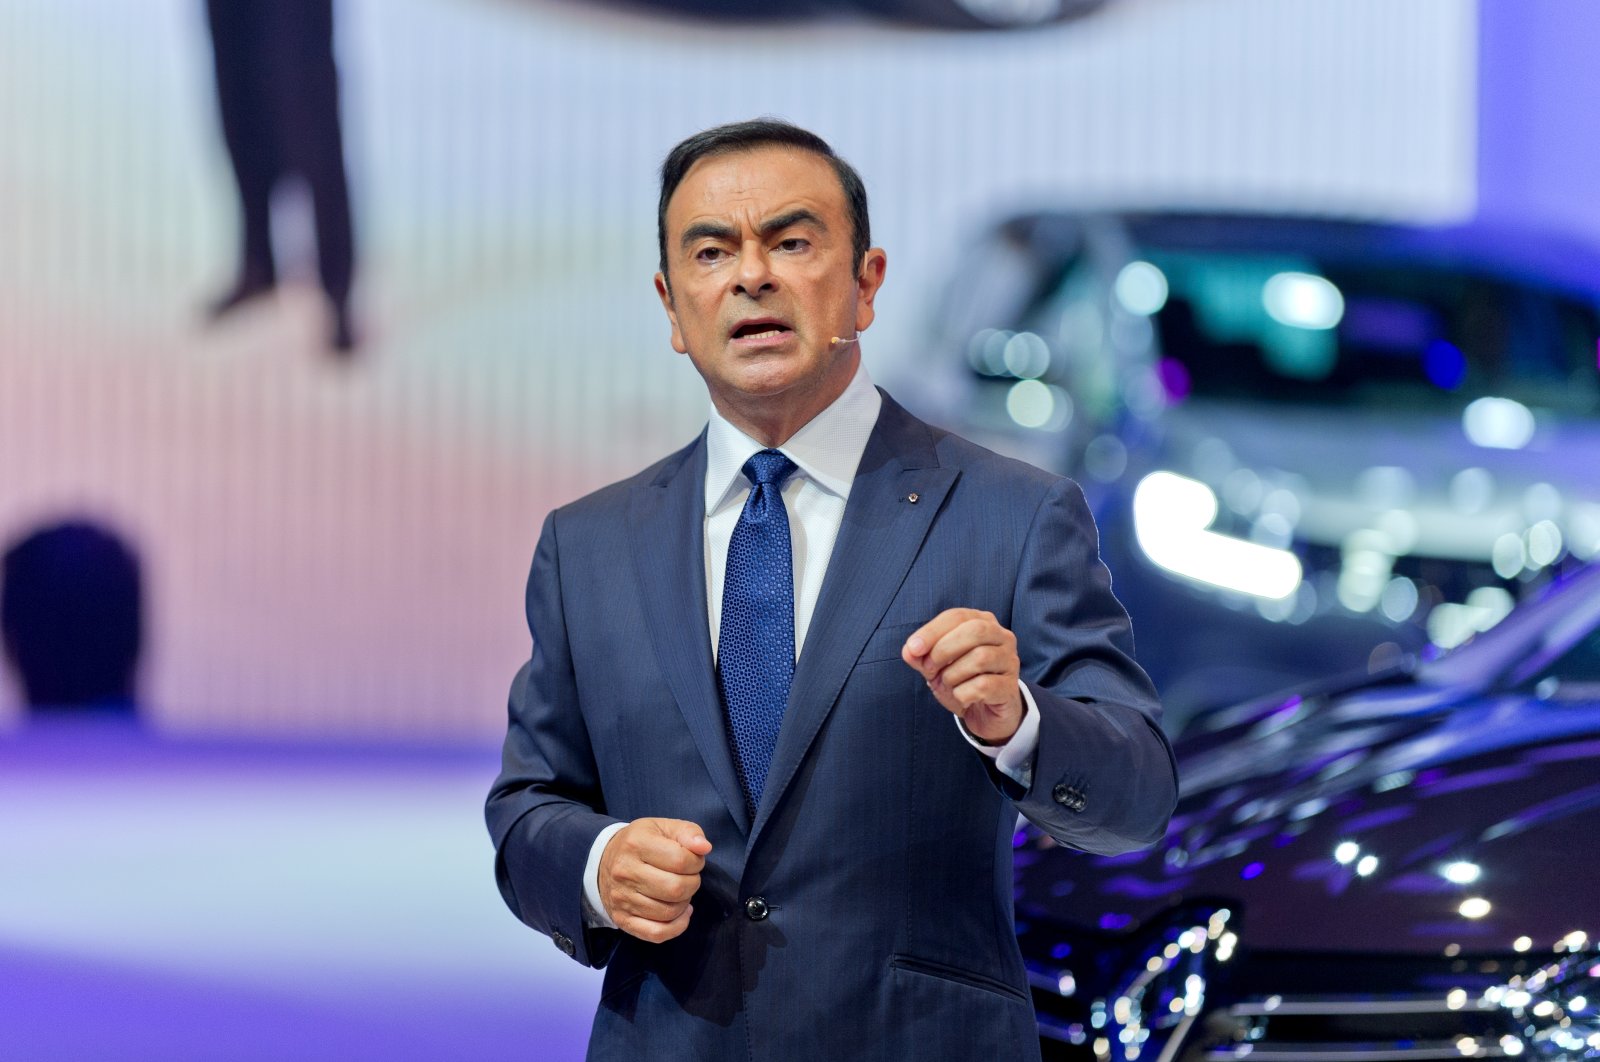 Then-Renault Nissan CEO Carlos Ghosn in a news conference for the new Renault Espace at the Paris motor show, France, Oct. 2, 2014. (Shutterstock File Photo)